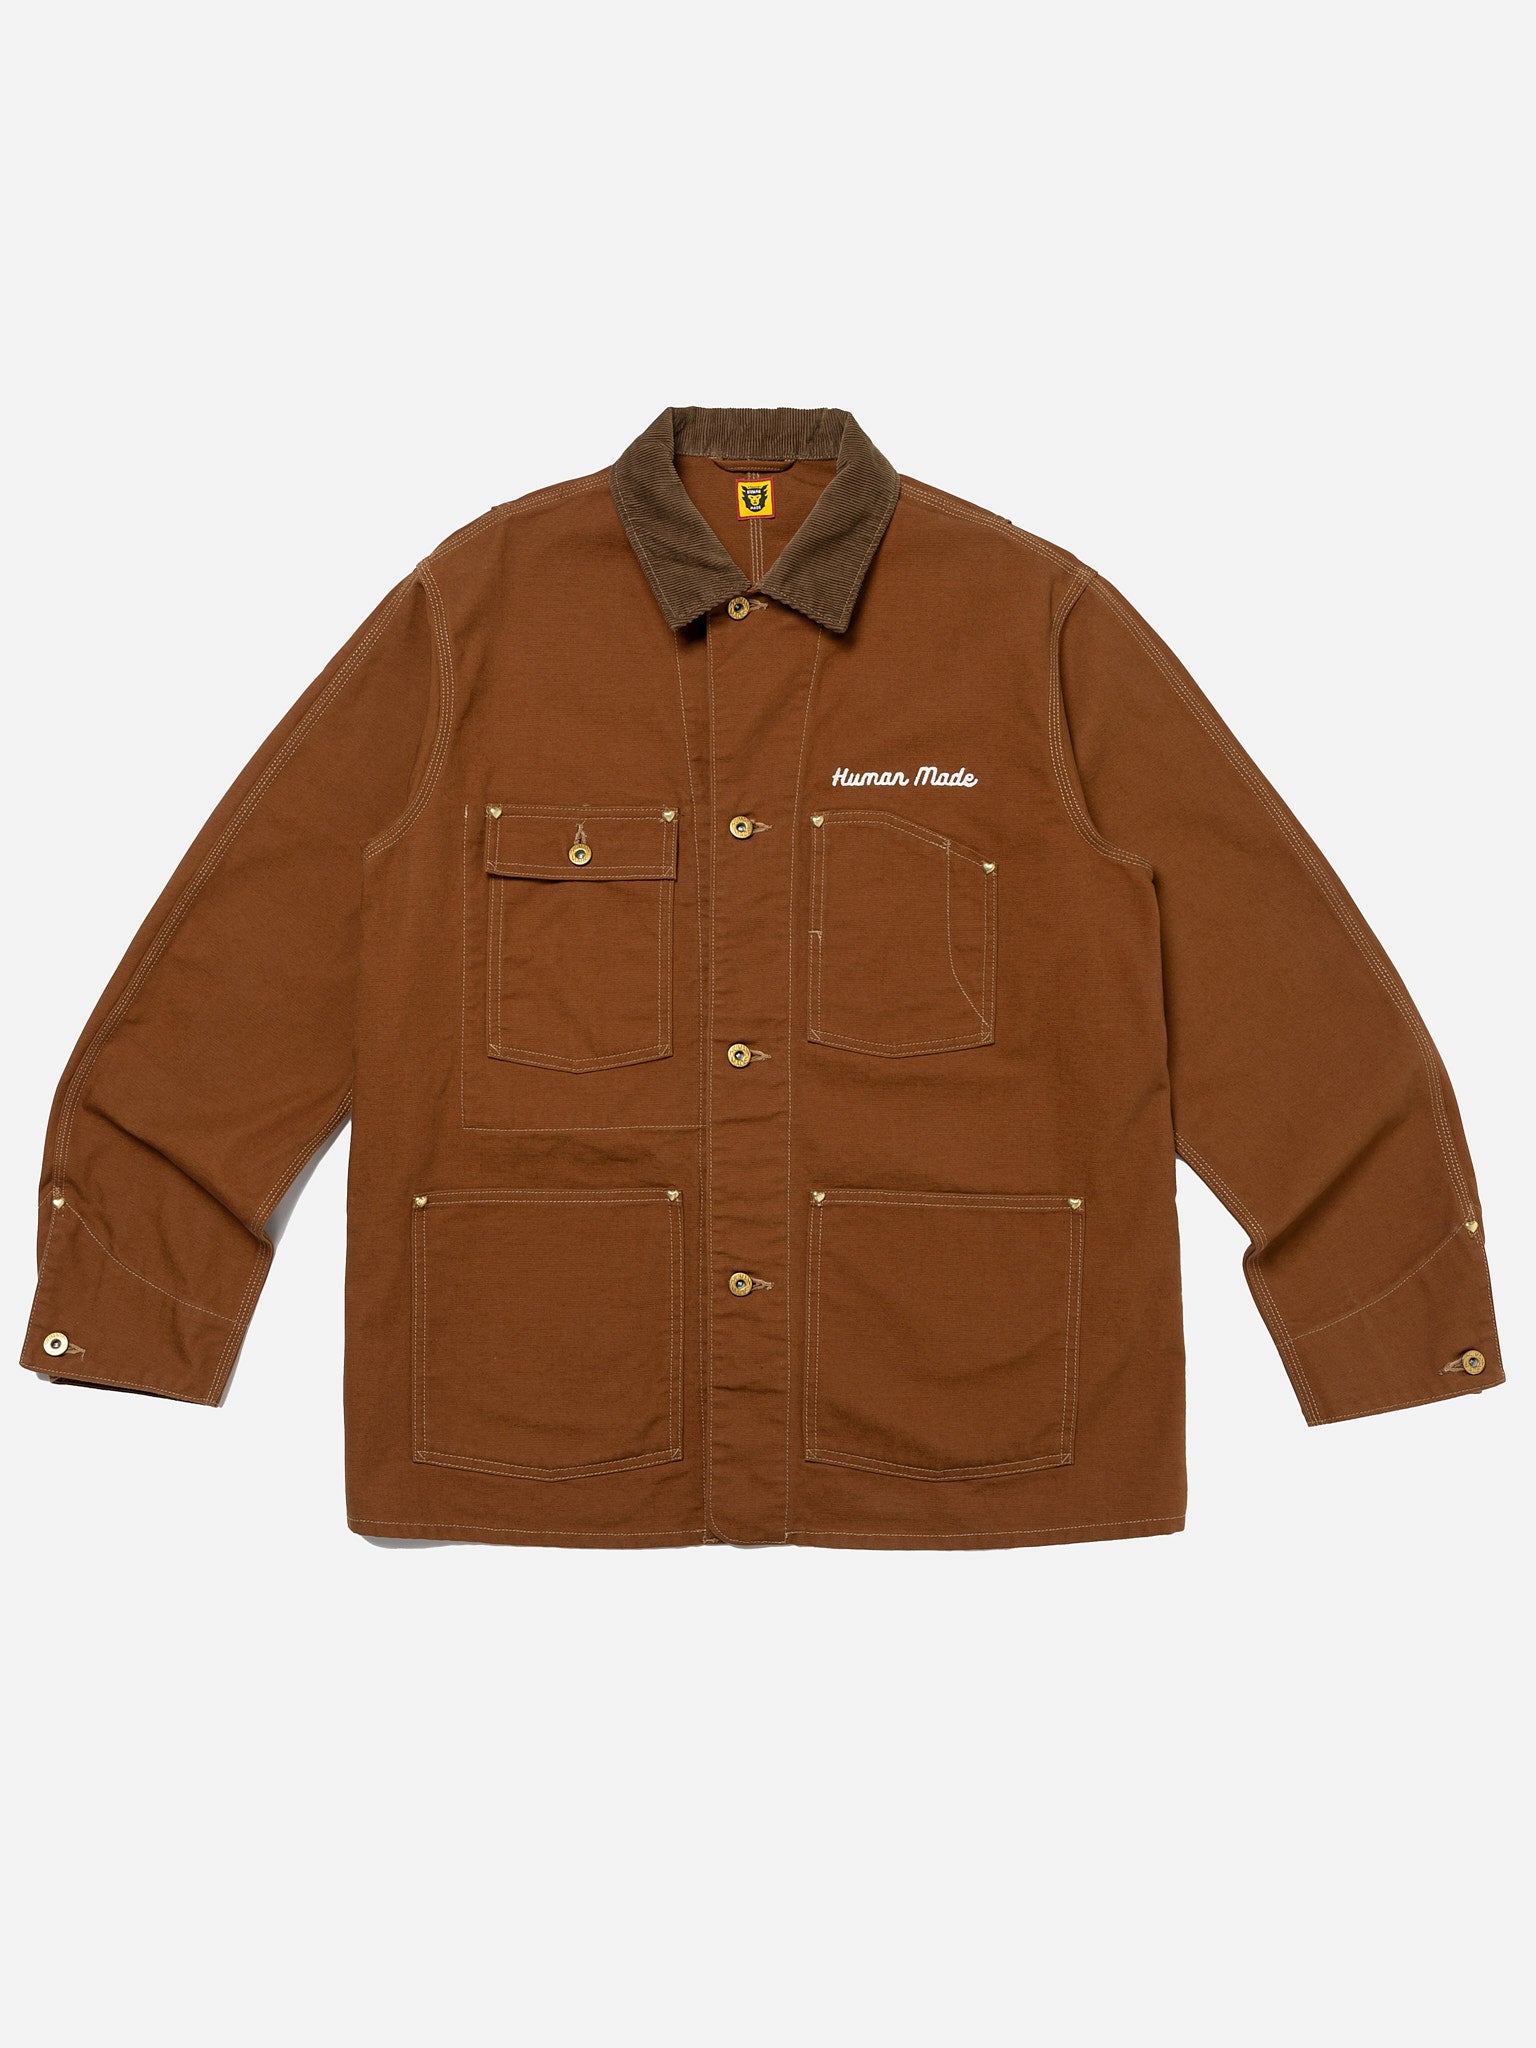 Human Made Duck Coverall Jacket – OALLERY